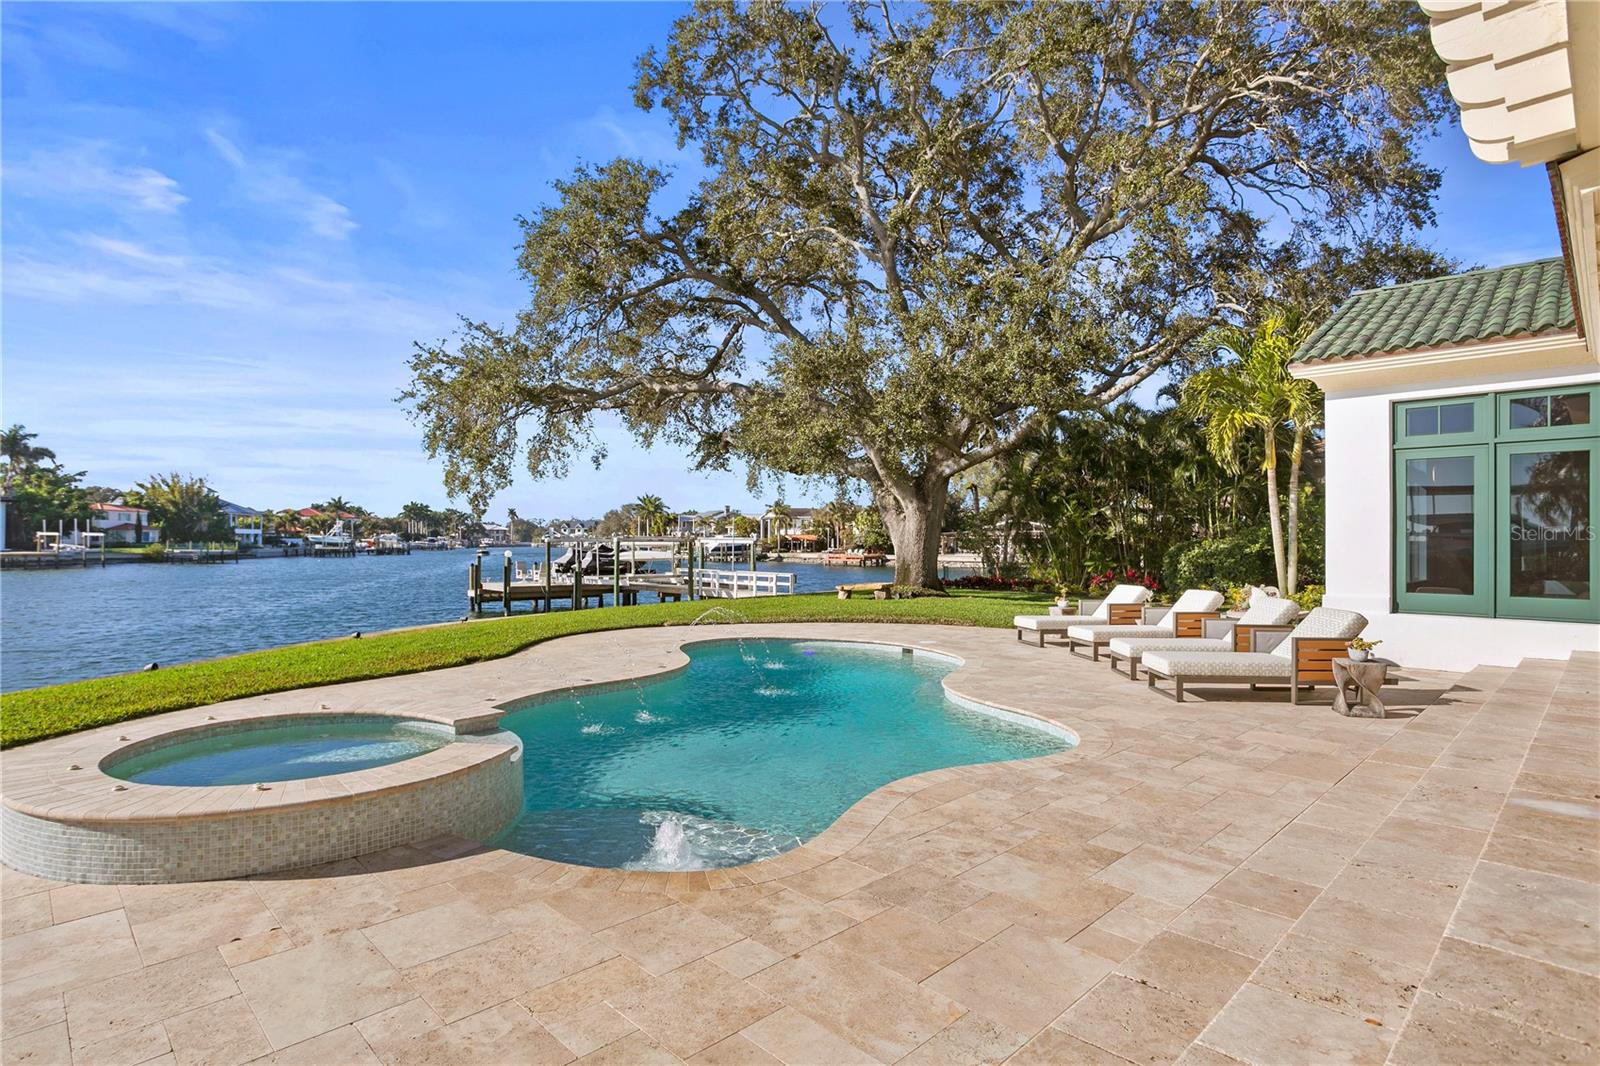 With views like this from the pool and spa you will see why Florida living is so special.